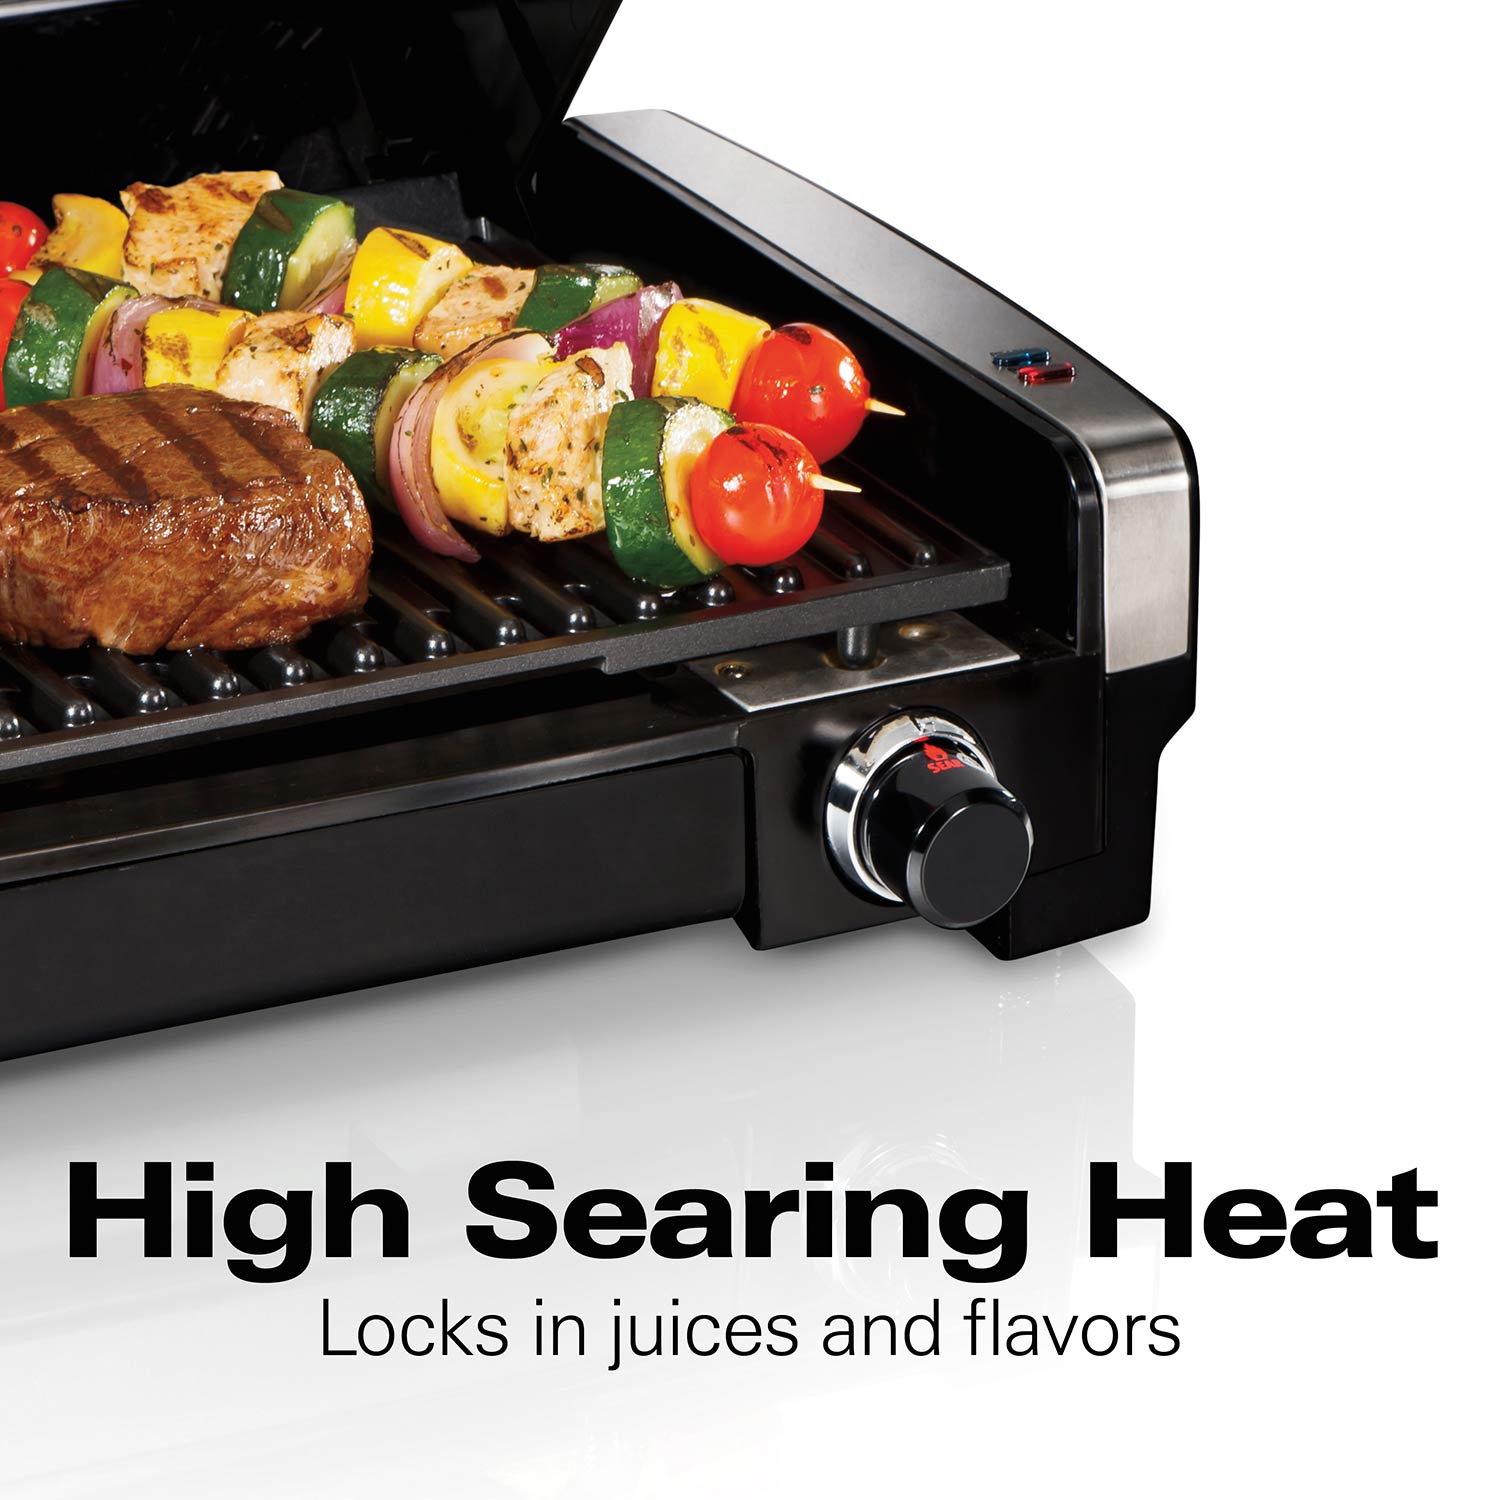 Hamilton Beach® Electric Indoor Searing Grill & Reviews